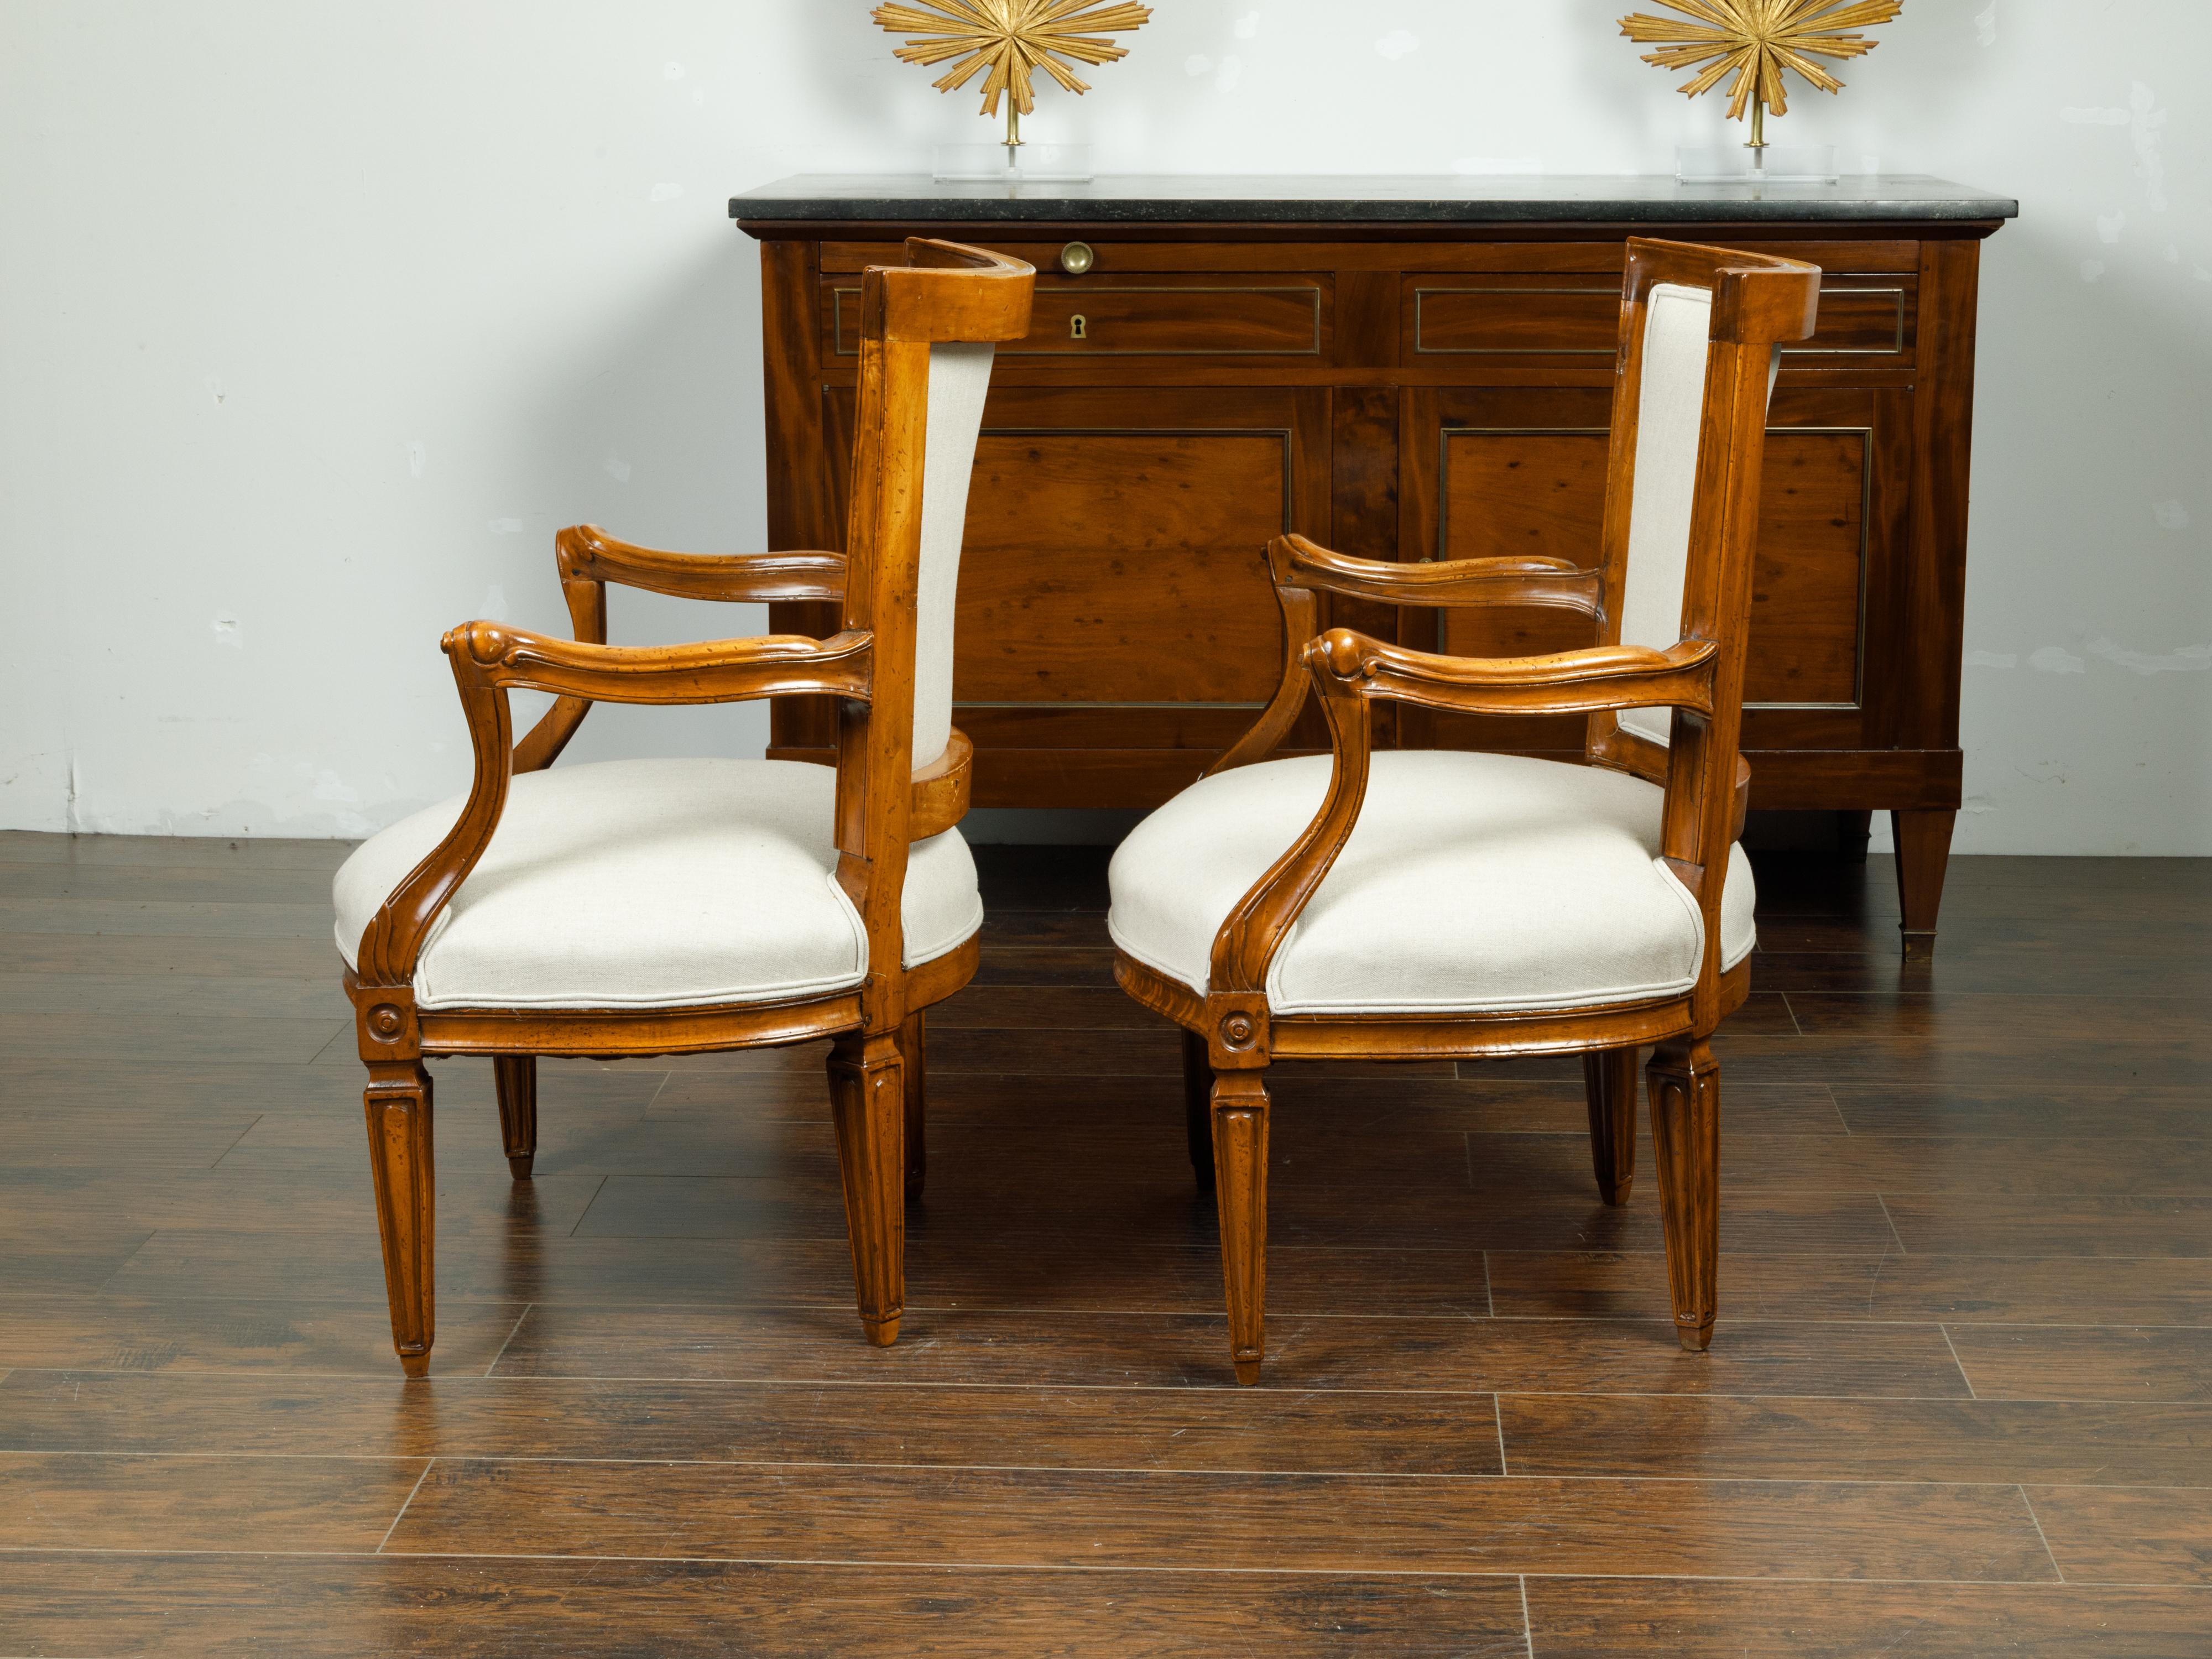 Pair of Italian 1860s Walnut Armchairs with Tapered Legs and New Upholstery For Sale 1